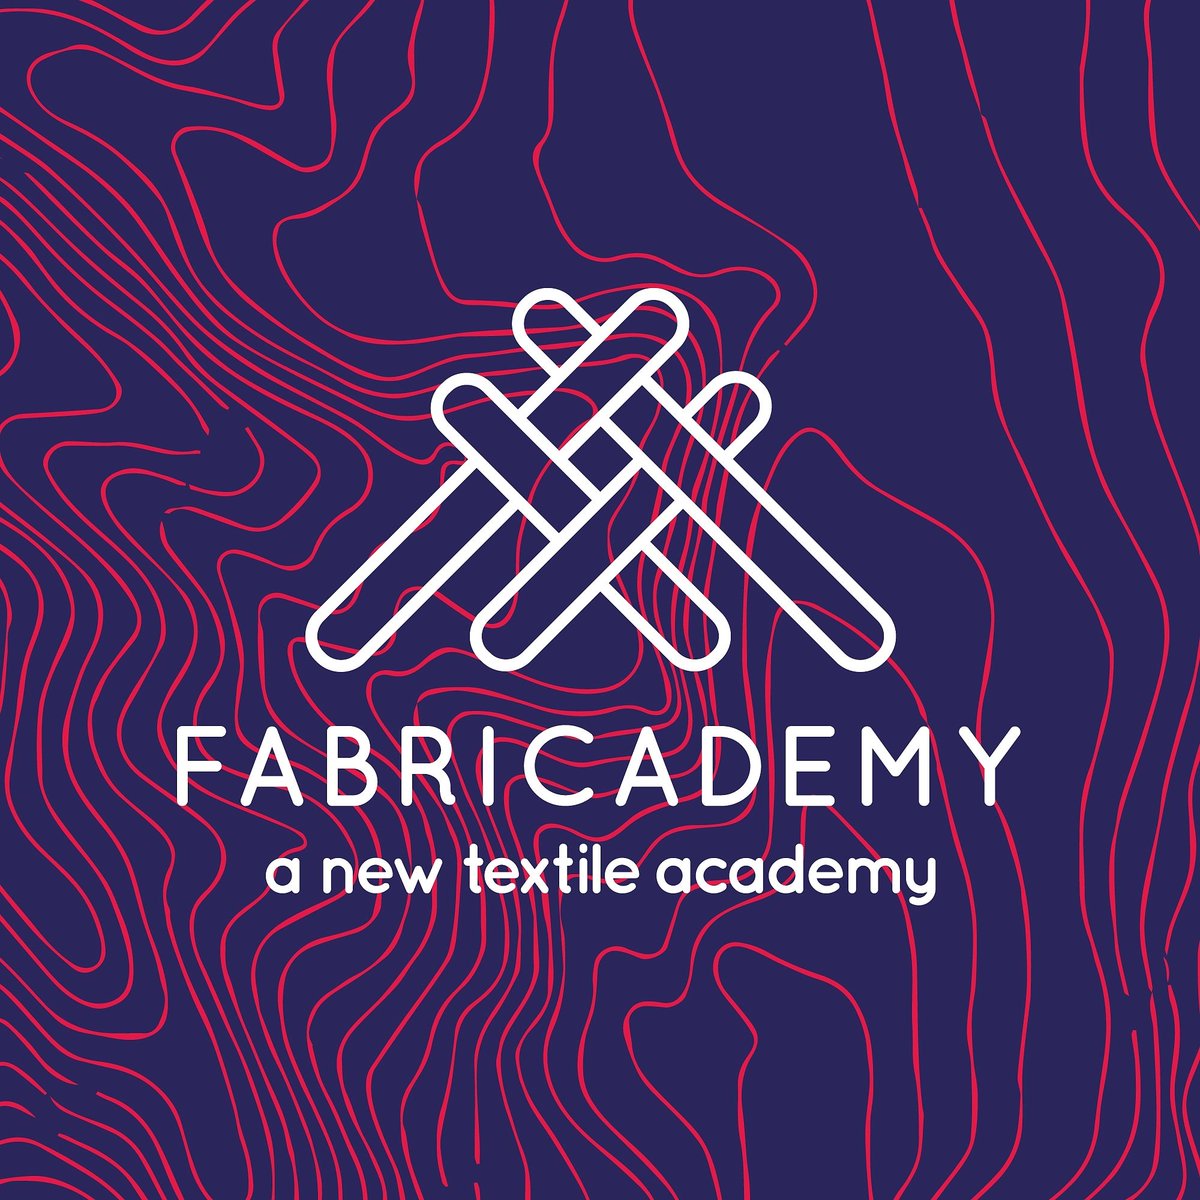 Camilo Ayala Garcia and Stefano Parisi lectured for Fabricademy